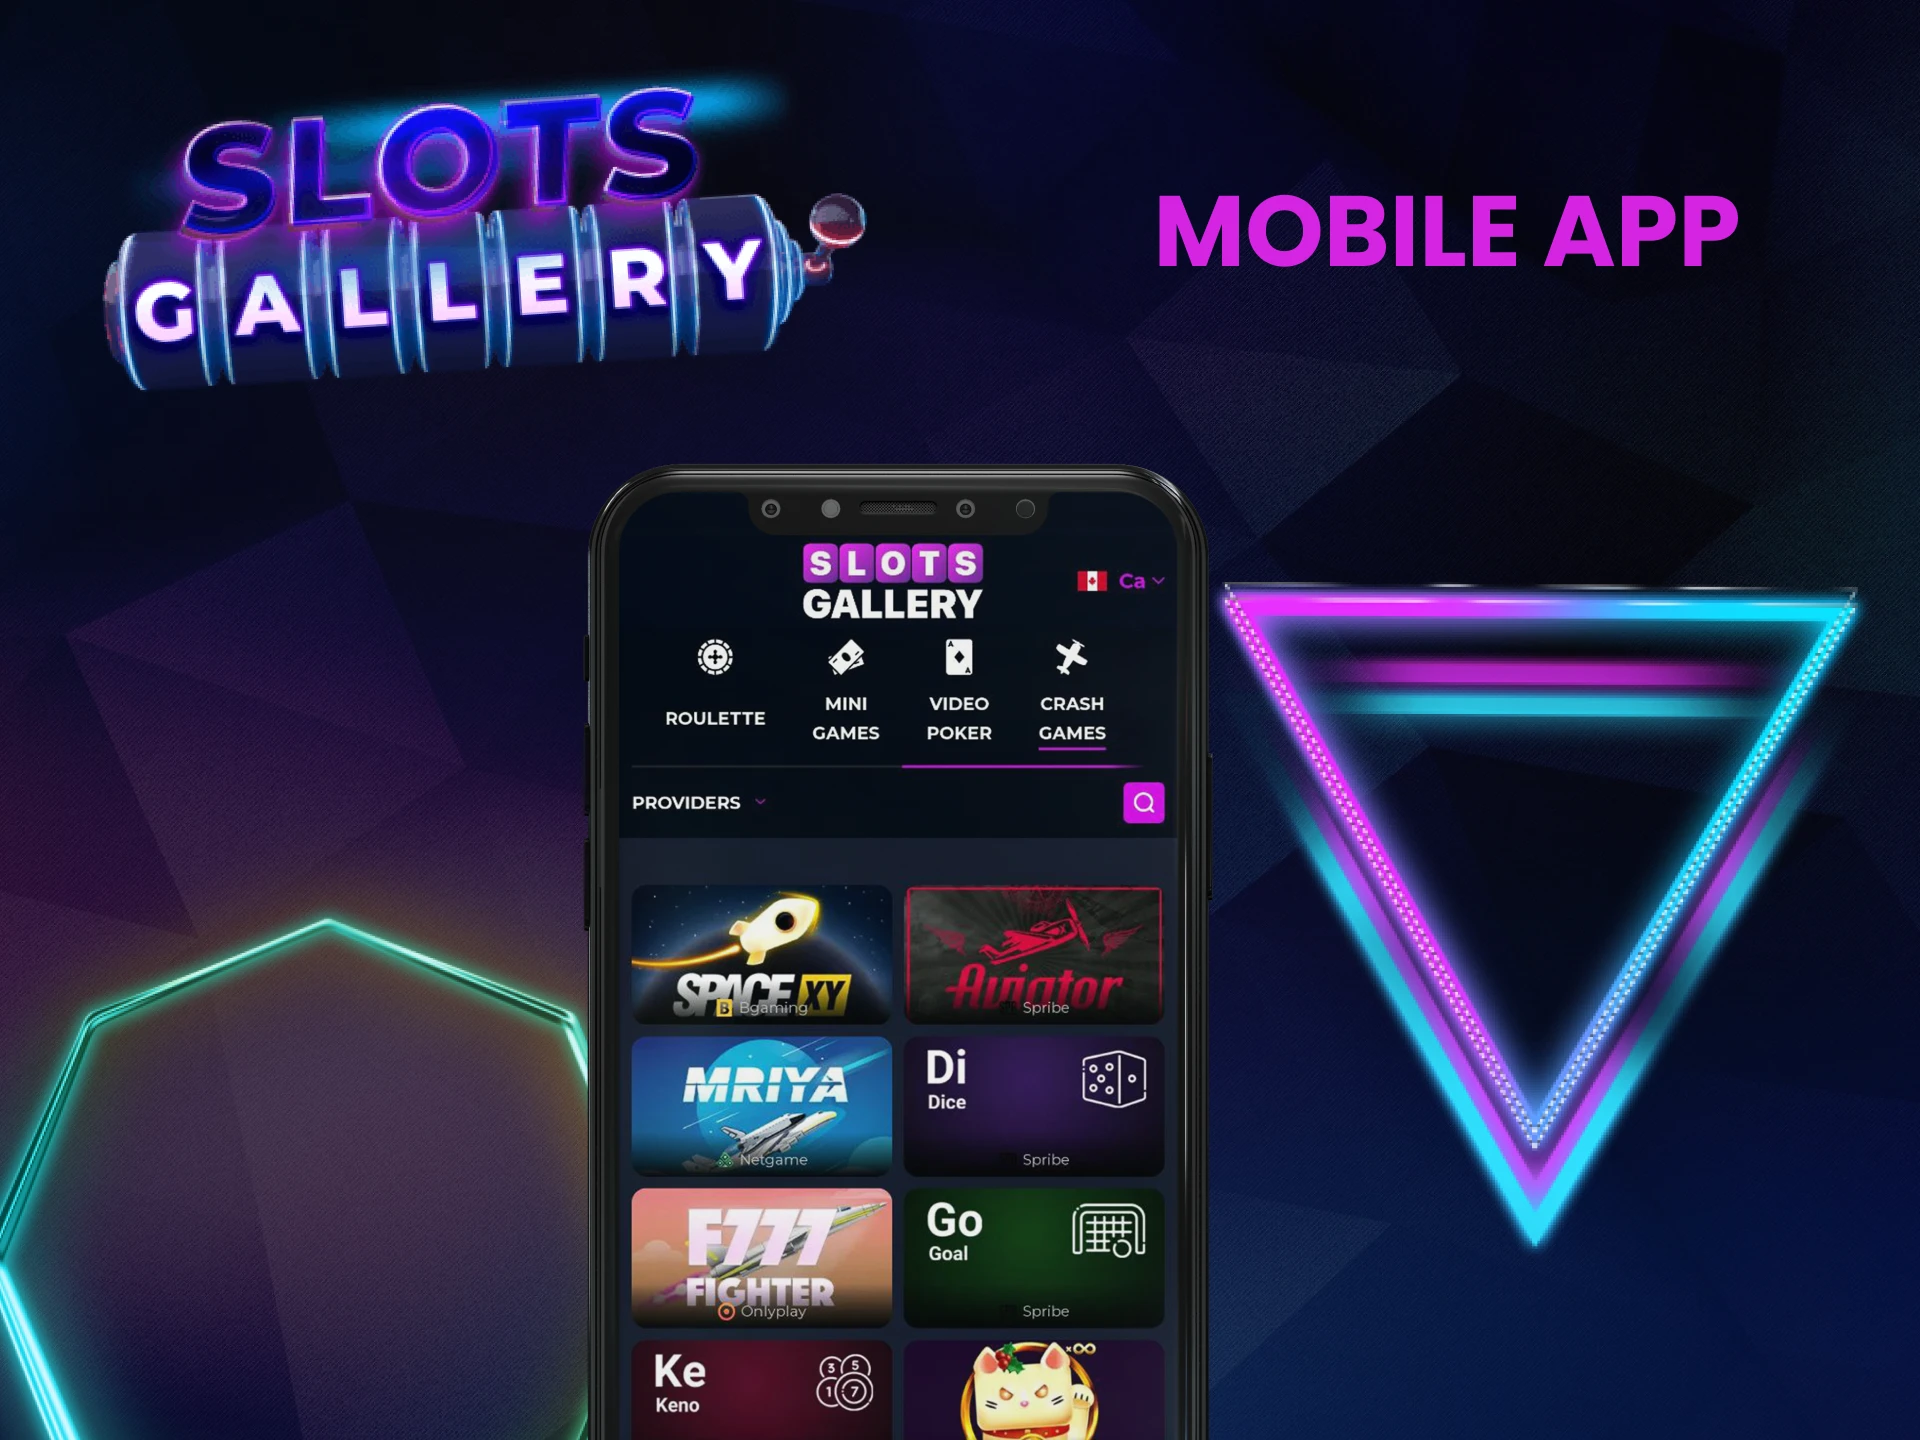 You can play crash games through the Slots Gallery application.